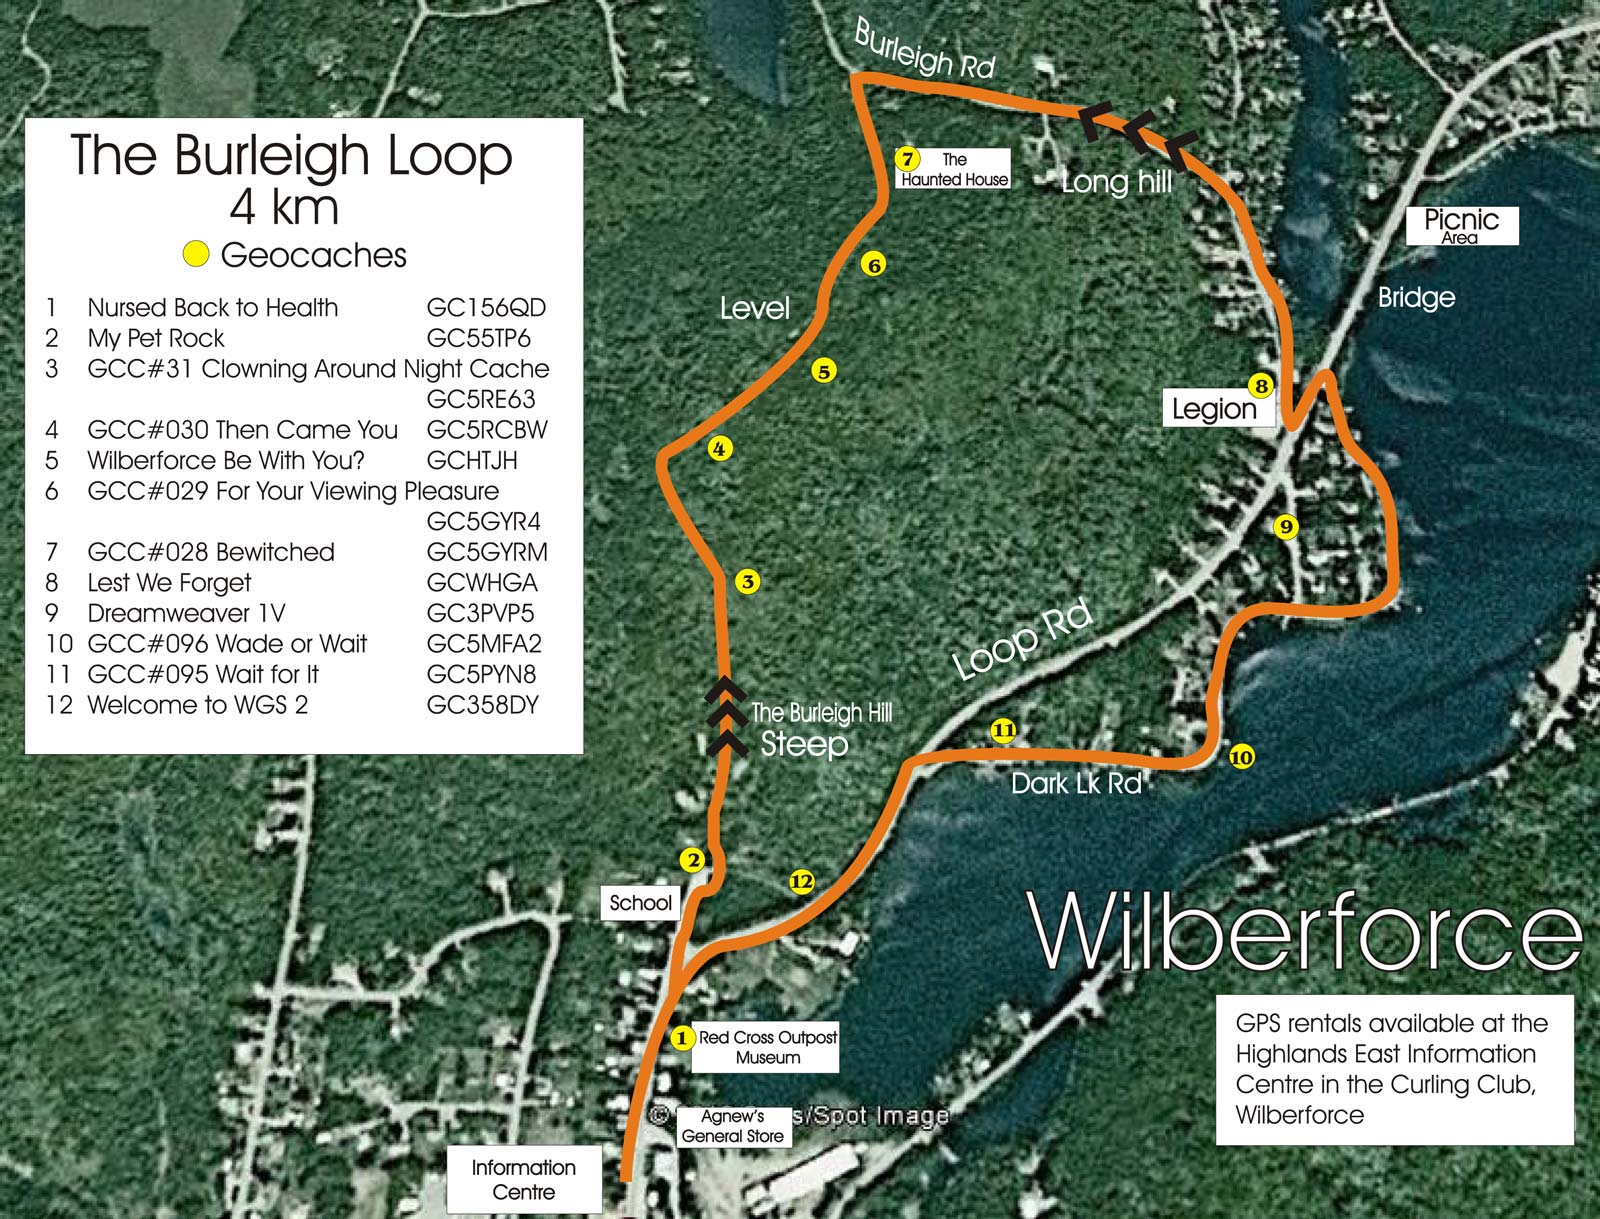 Satellite map of the area showing the Burleigh Loop trail north of Wilberforce